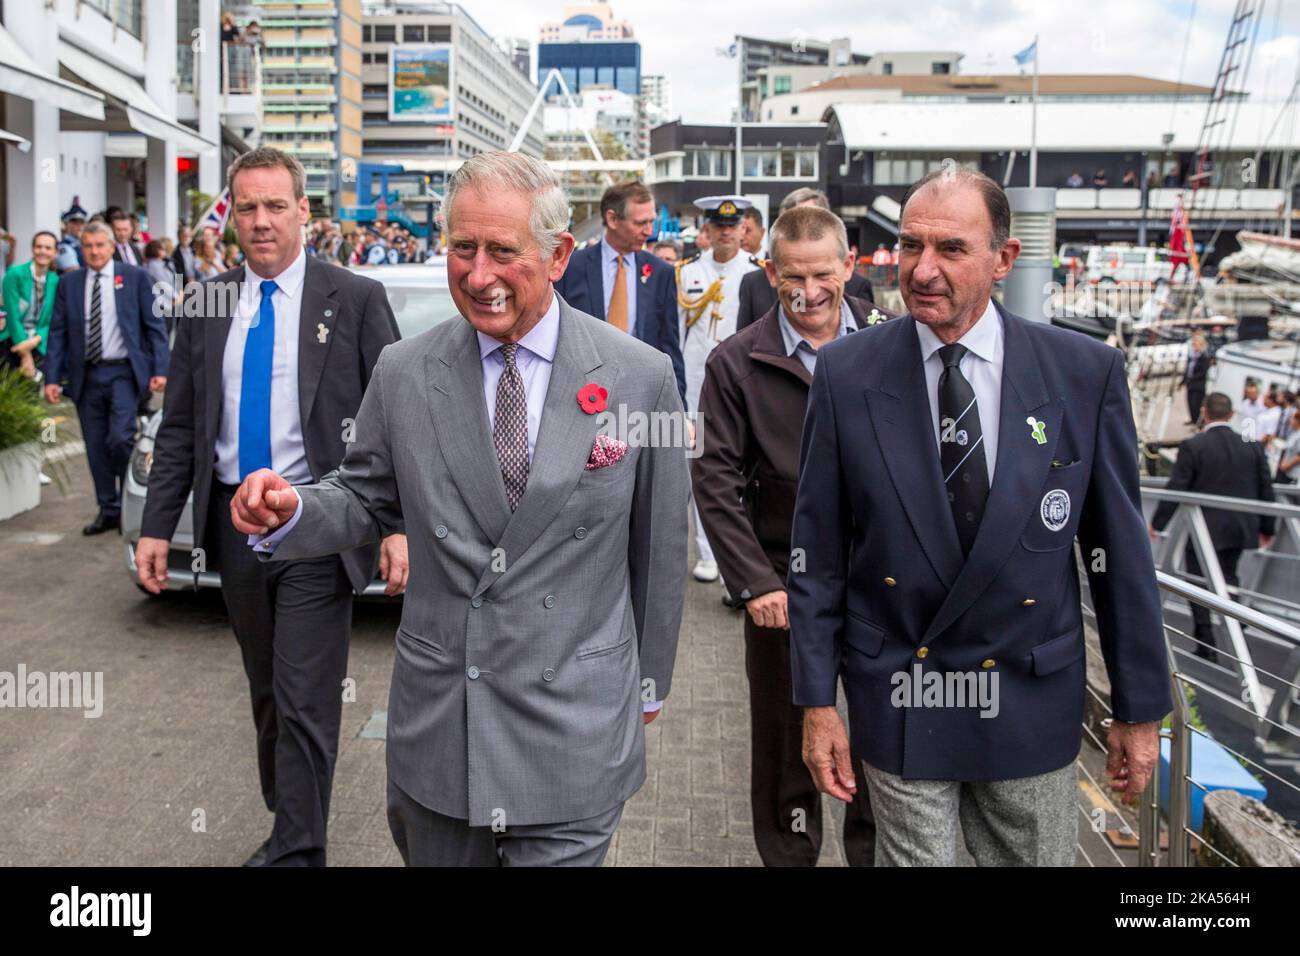 The Prince of Wales arrives to visit the New Zealand Youth Training Vessel, Spirit of New Zealand, Princes Wharf, New Zealand, Stock Photo